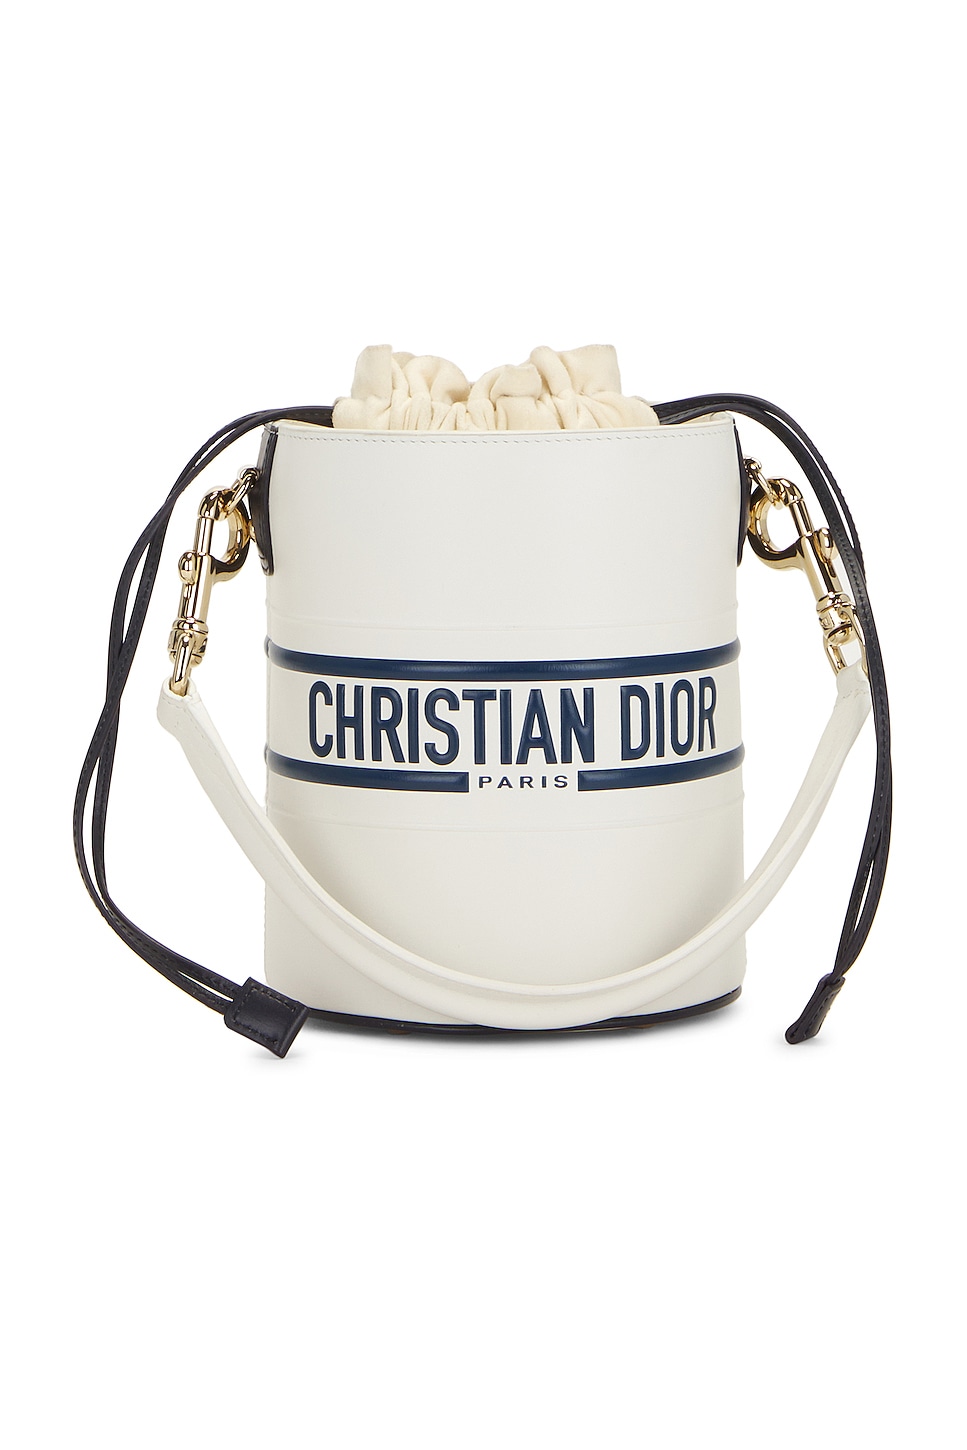 FWRD Renew Dior Leather Vibe Bucket Bag in White